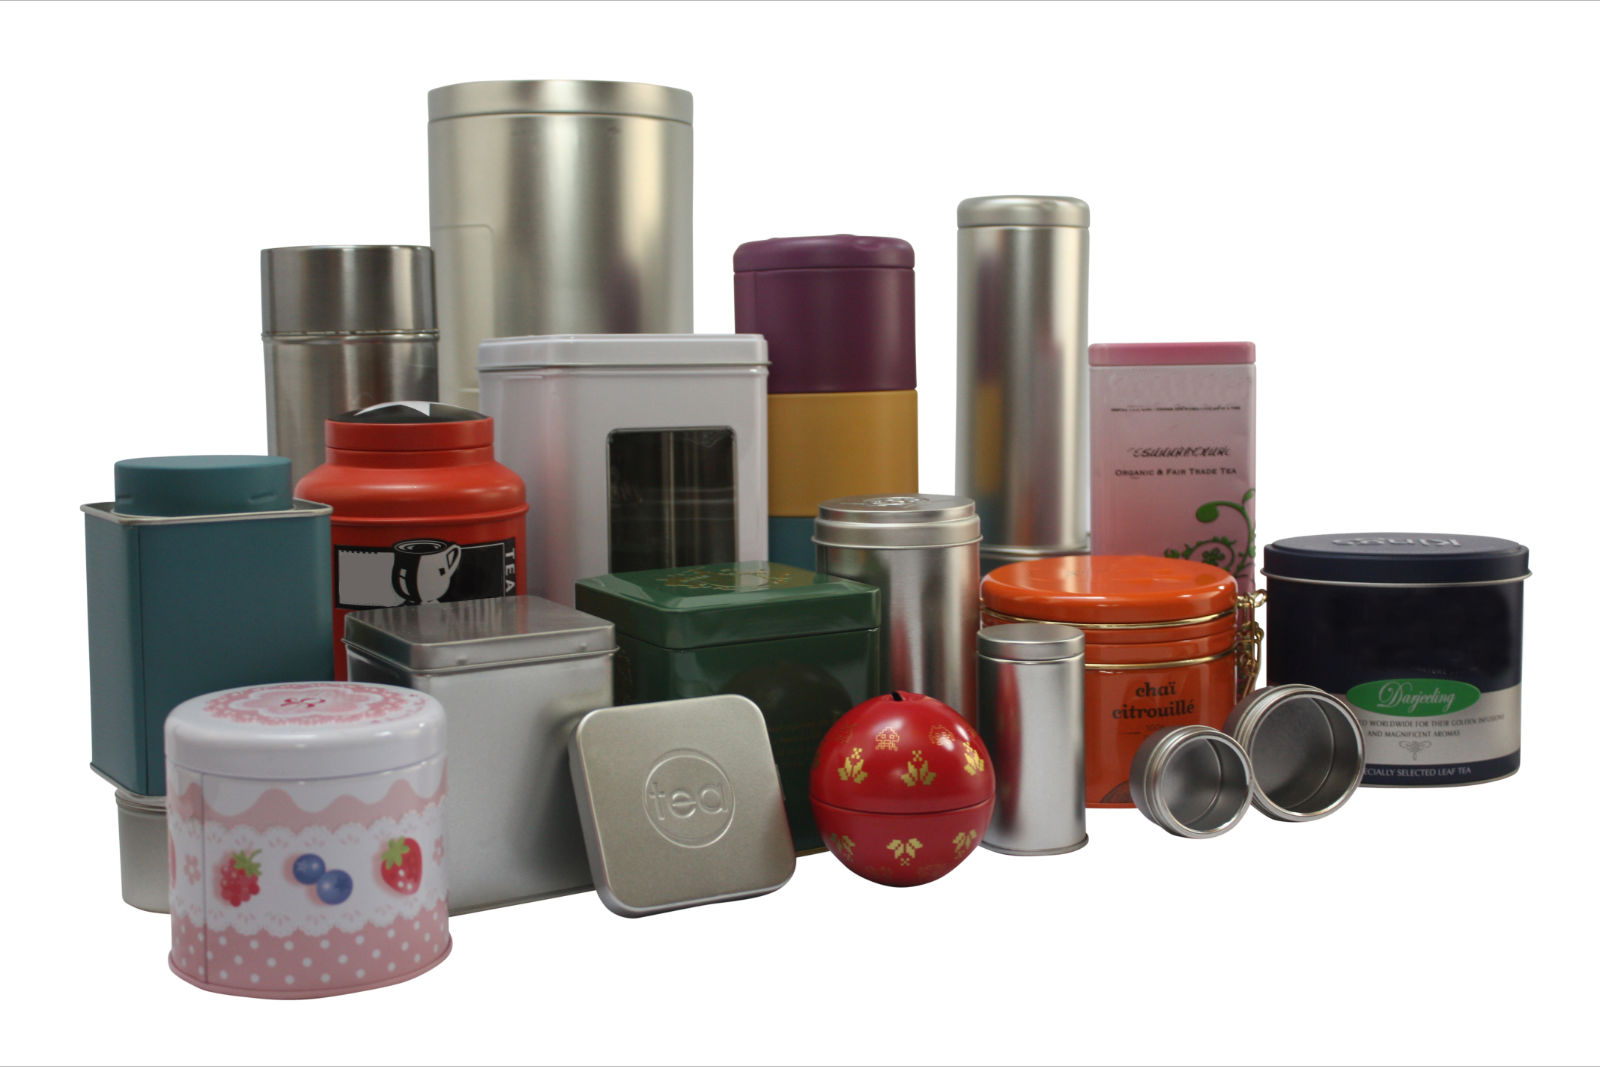 Metal cans with different colors and designs